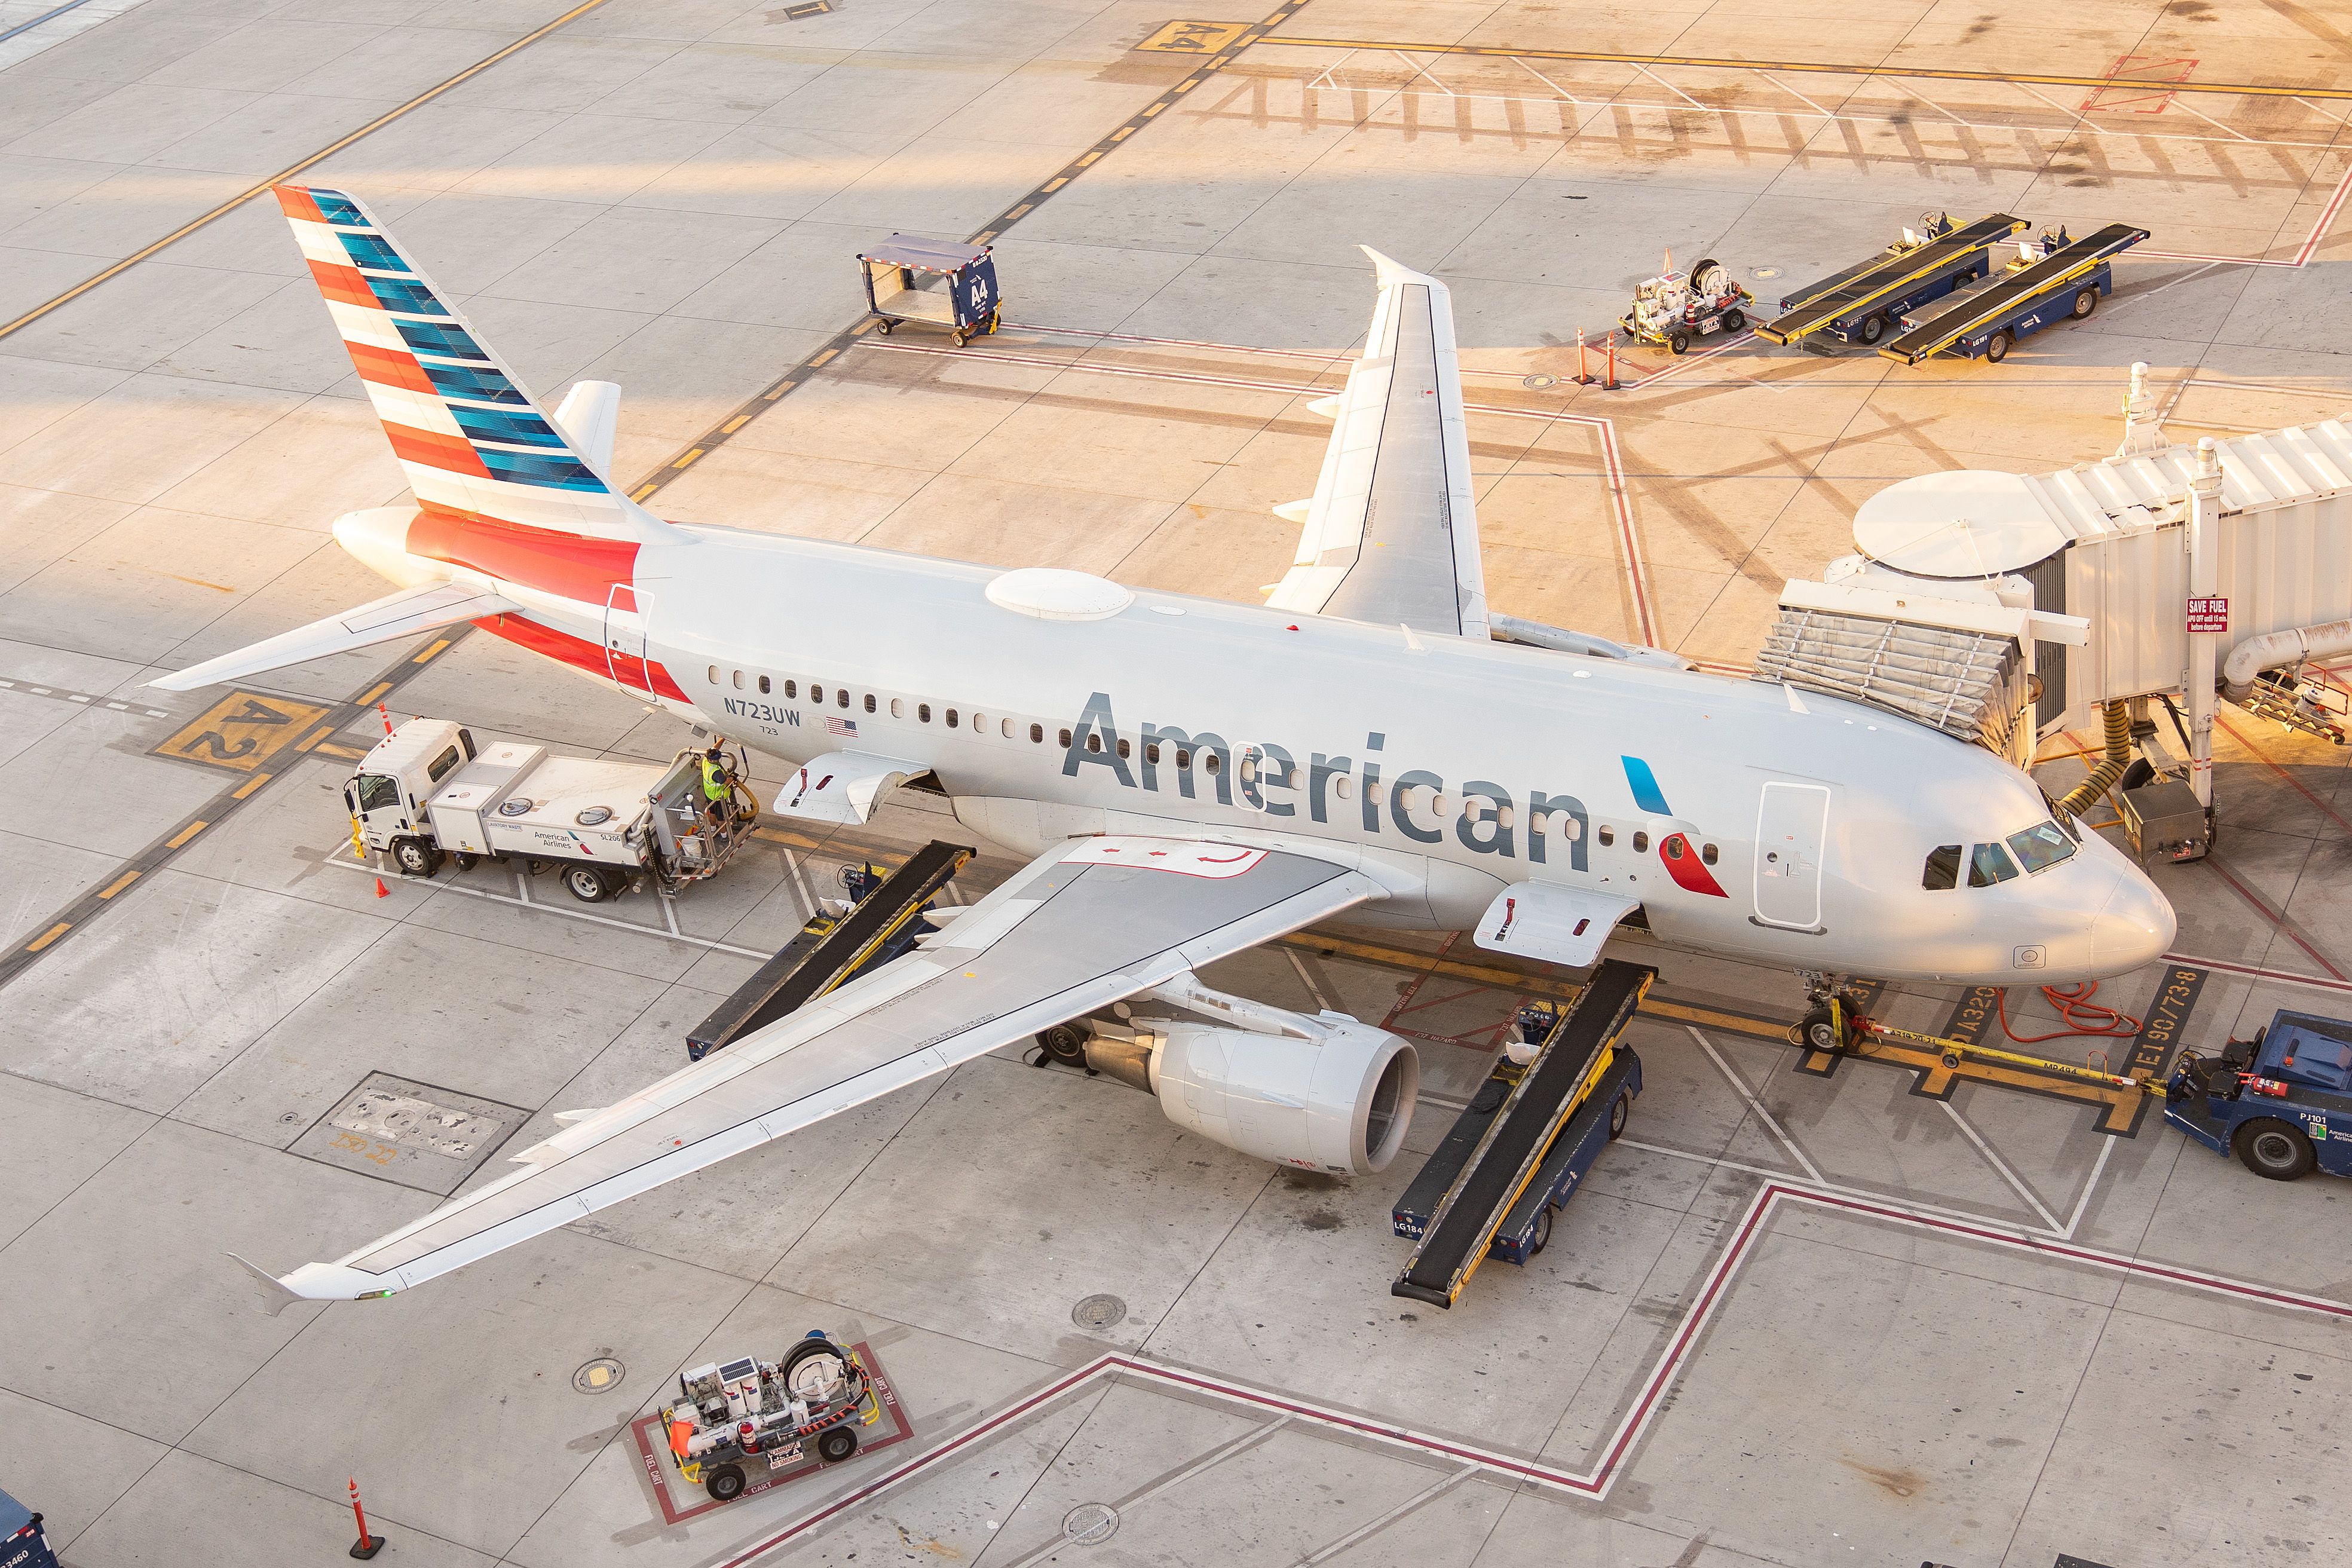 American Airlines Airbus A319-112 (N723UW) at the gate at Phoenix Sky Harbor International Airport.